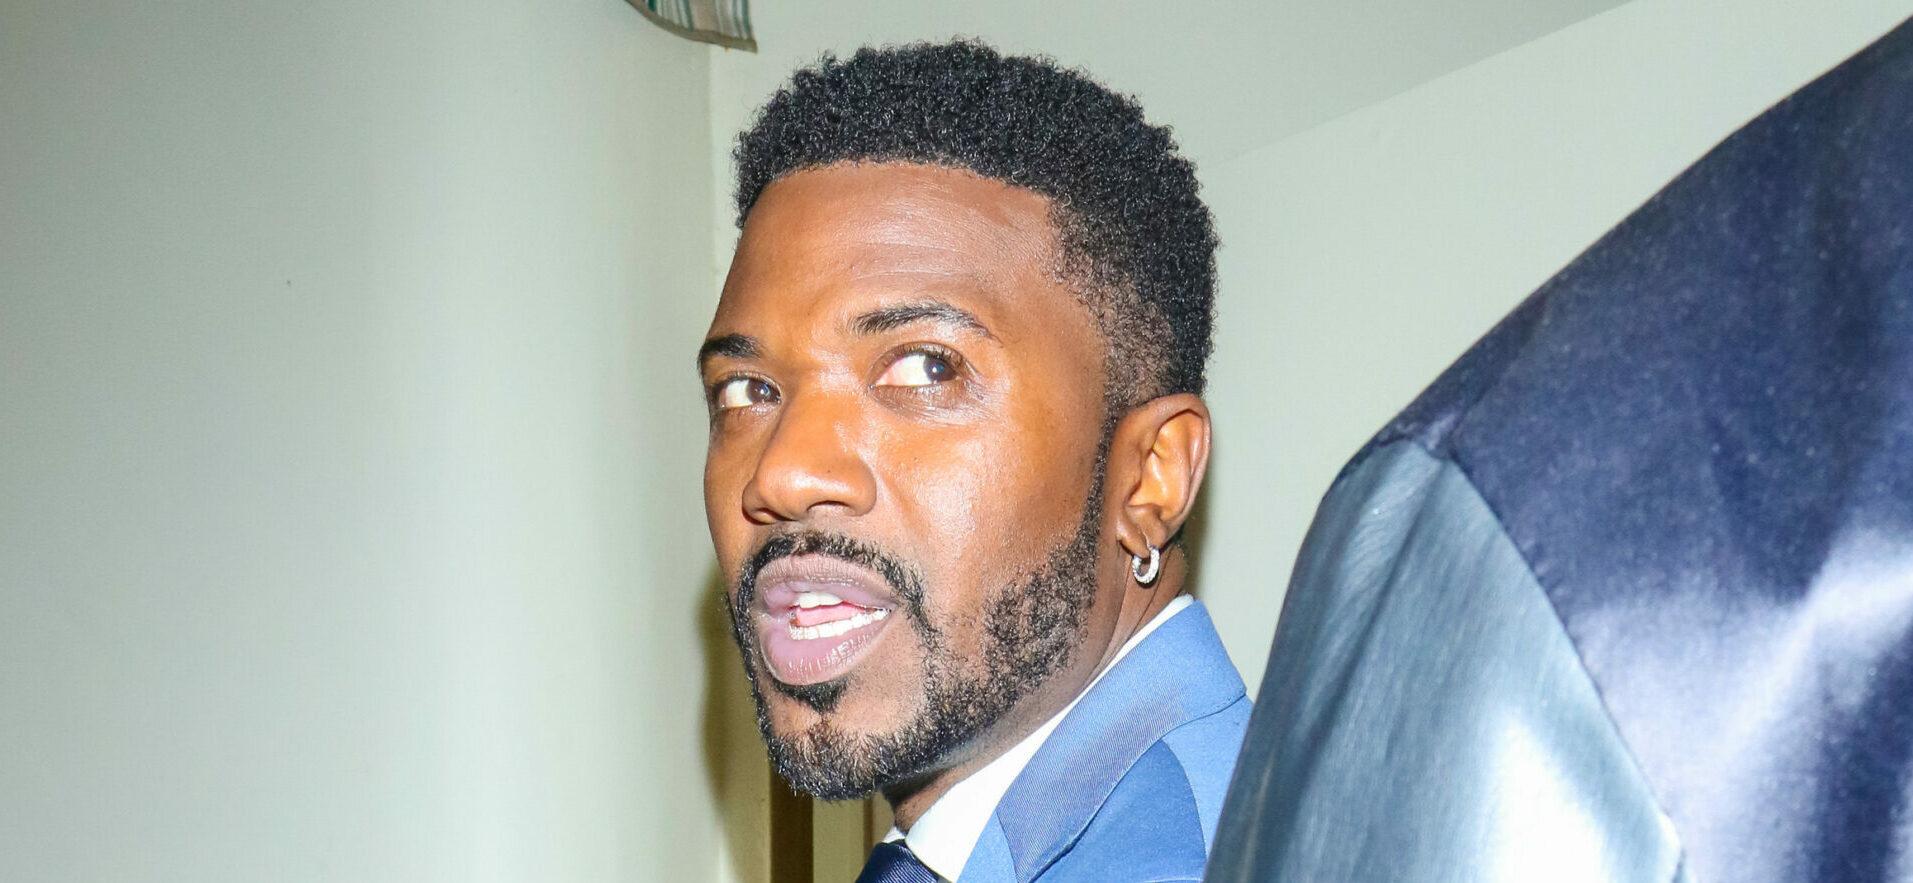 Singer Ray J Finally Released From Hospital After Pneumonia Battle